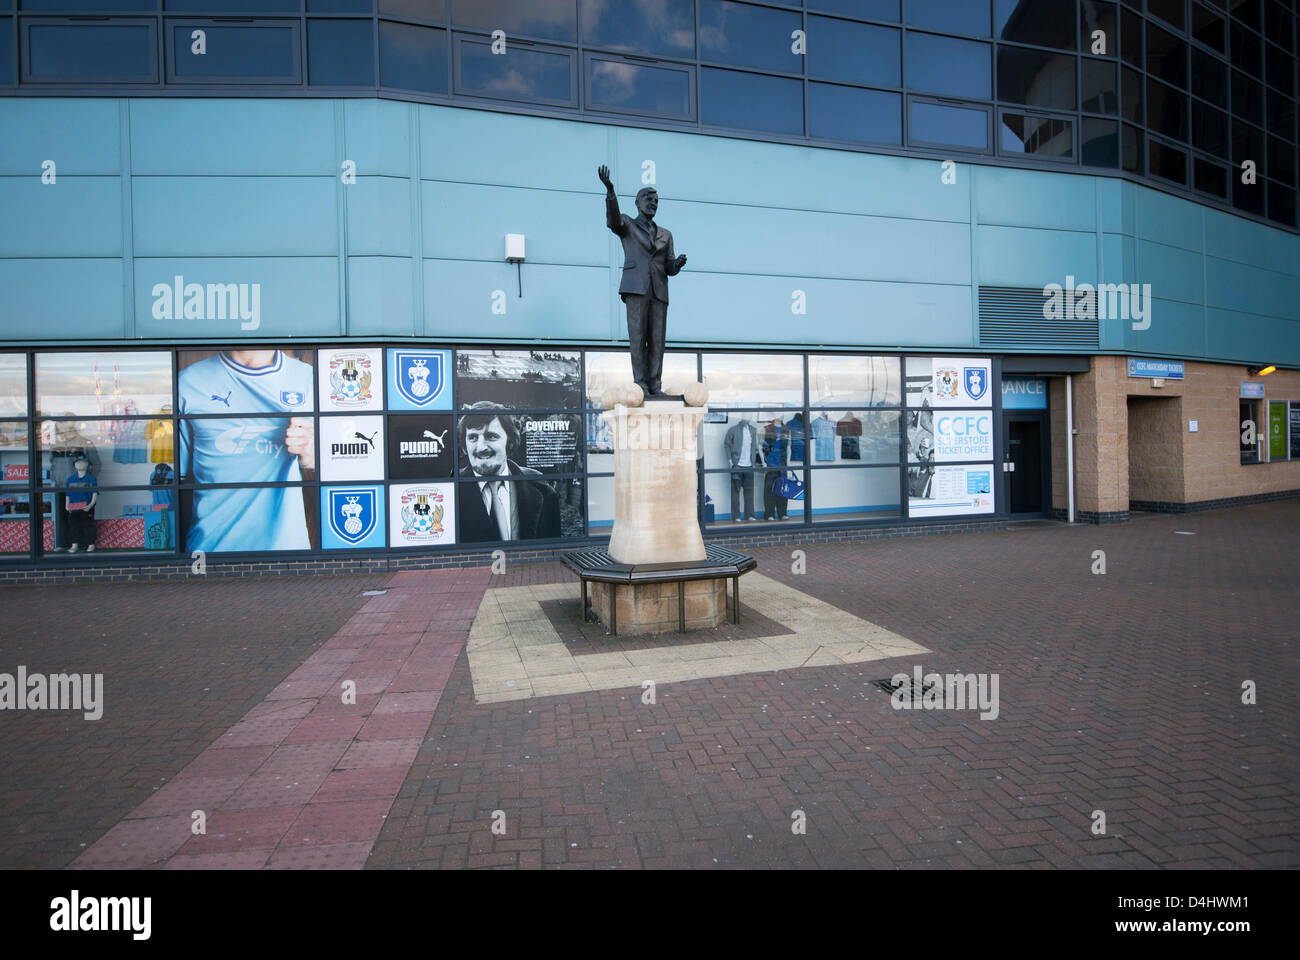 Coventry, UK. 14th March 2013. 14/03/2013 Coventry England UK,Arena Coventry Ltd announce application to the high court in London to request it makes an administration order against Coventry City Football Club. Statue of Jimmy Hill outside The Ricoh Arena The club are said to owe ACL over £1.3 million in unpaid rent on the football ground.  Credit:  John Martin / Alamy Live News Stock Photo